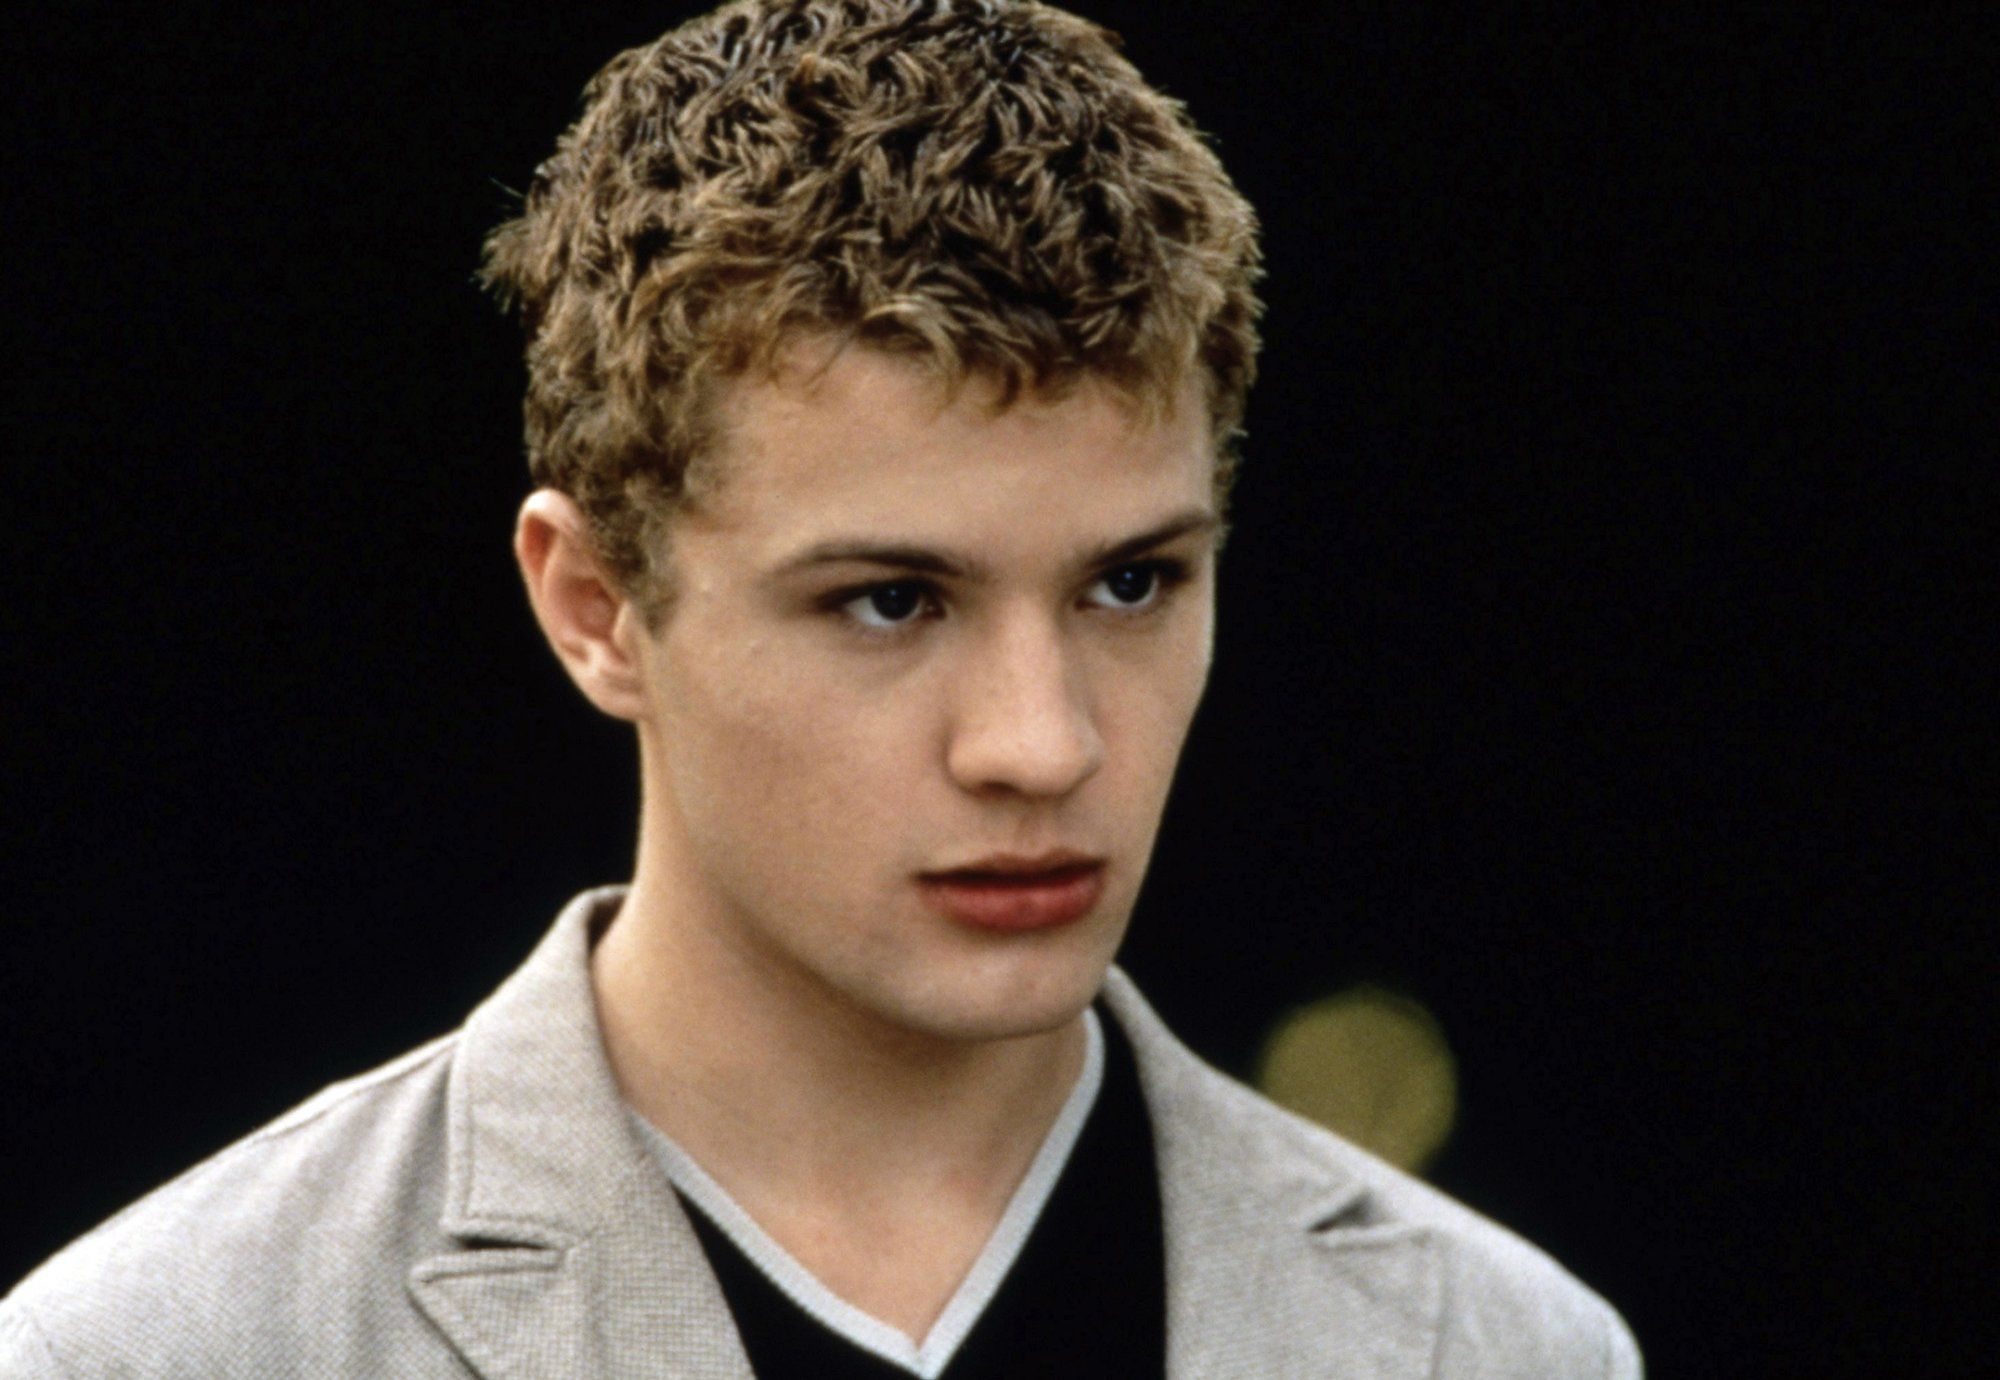 You got: Ryan Phillippe! Buy Some Books at the Book Fair and We’ll Give You a ’90s Teen Heartthrob Boyfriend to Read Them With